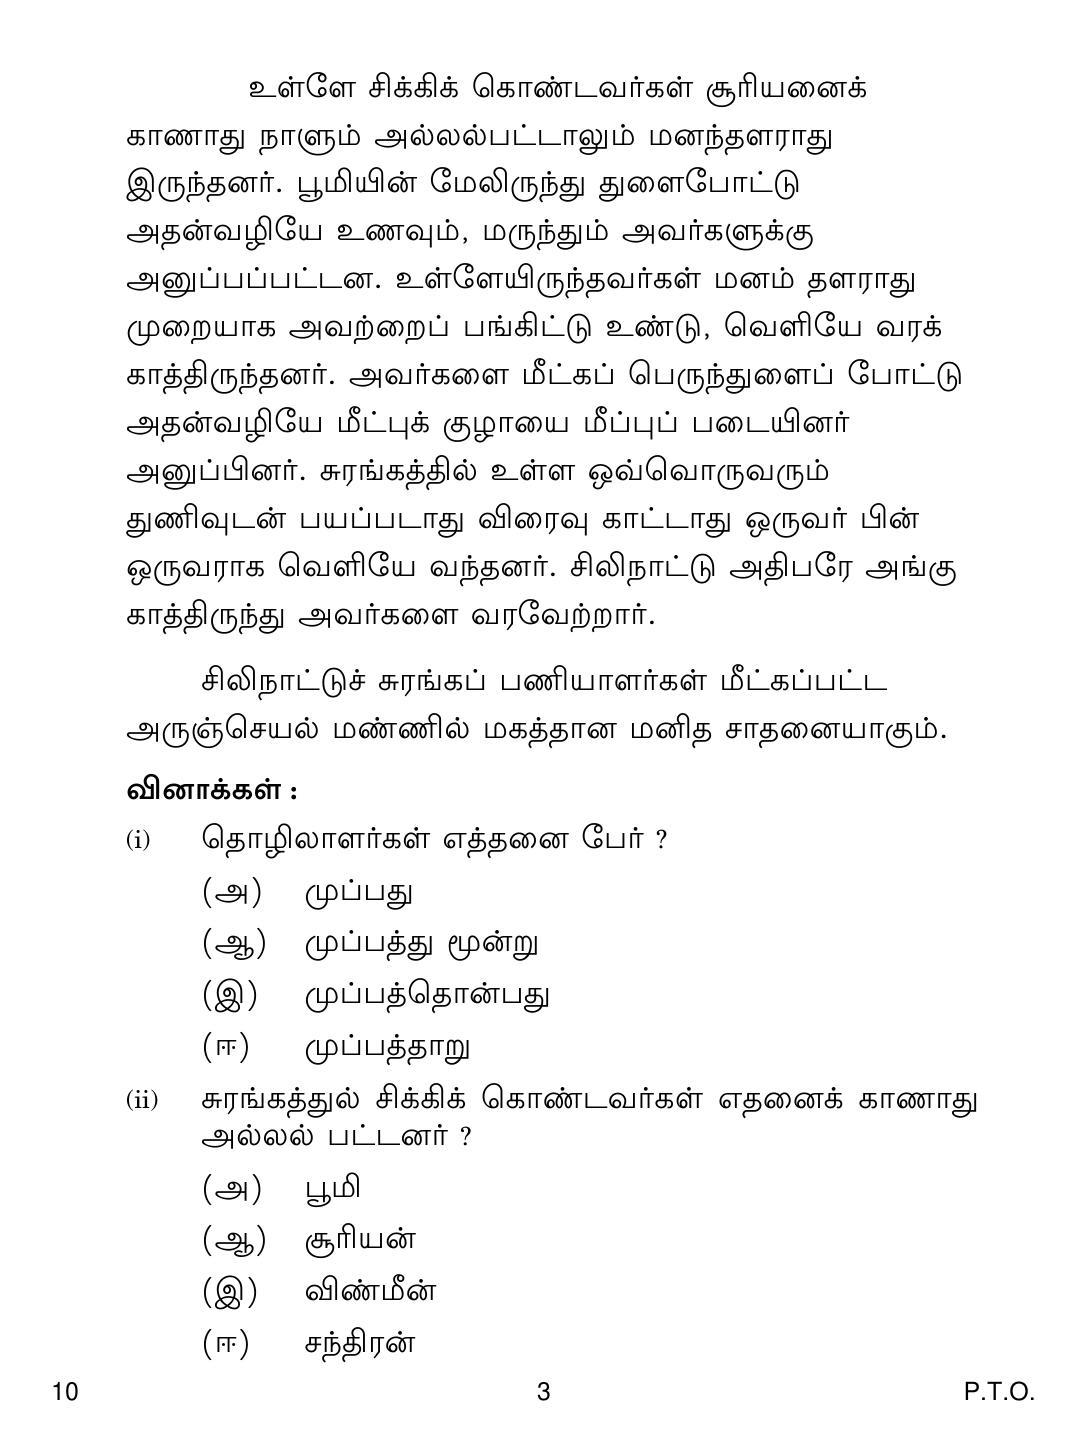 CBSE Class 10 10 Tamil 2019 Question Paper - Page 3